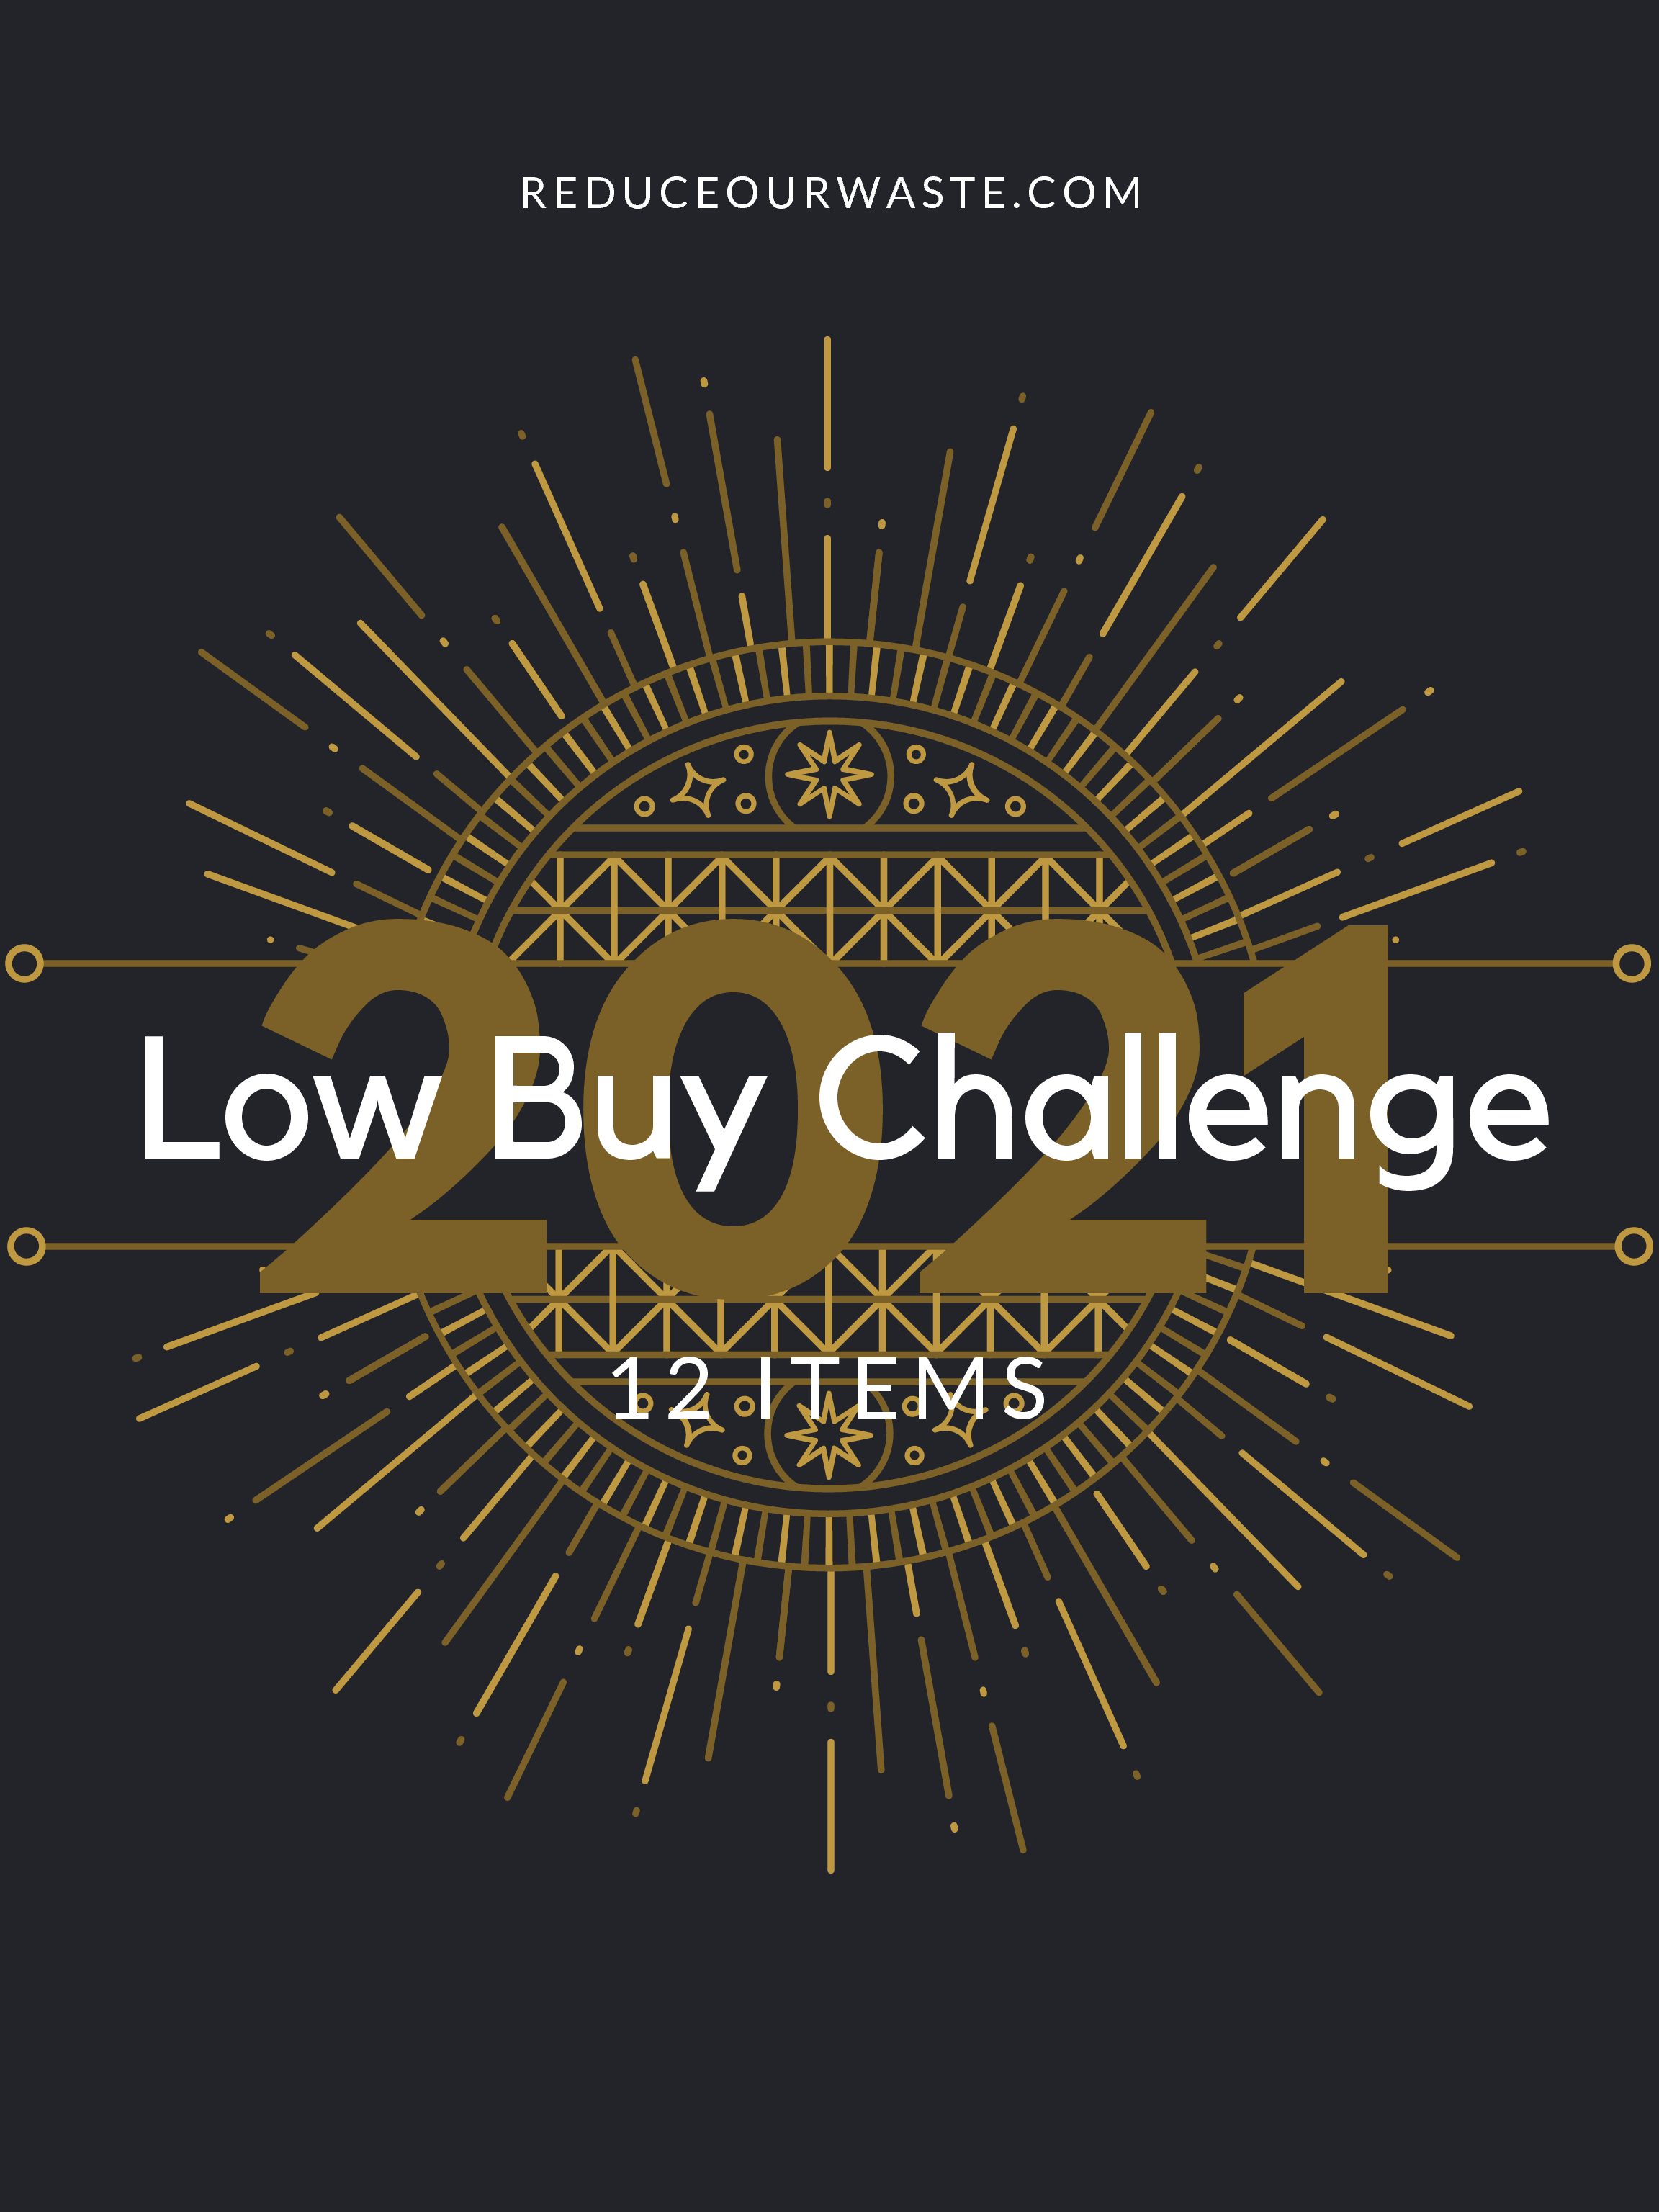 New year, new goal:  Low Buy Challenge